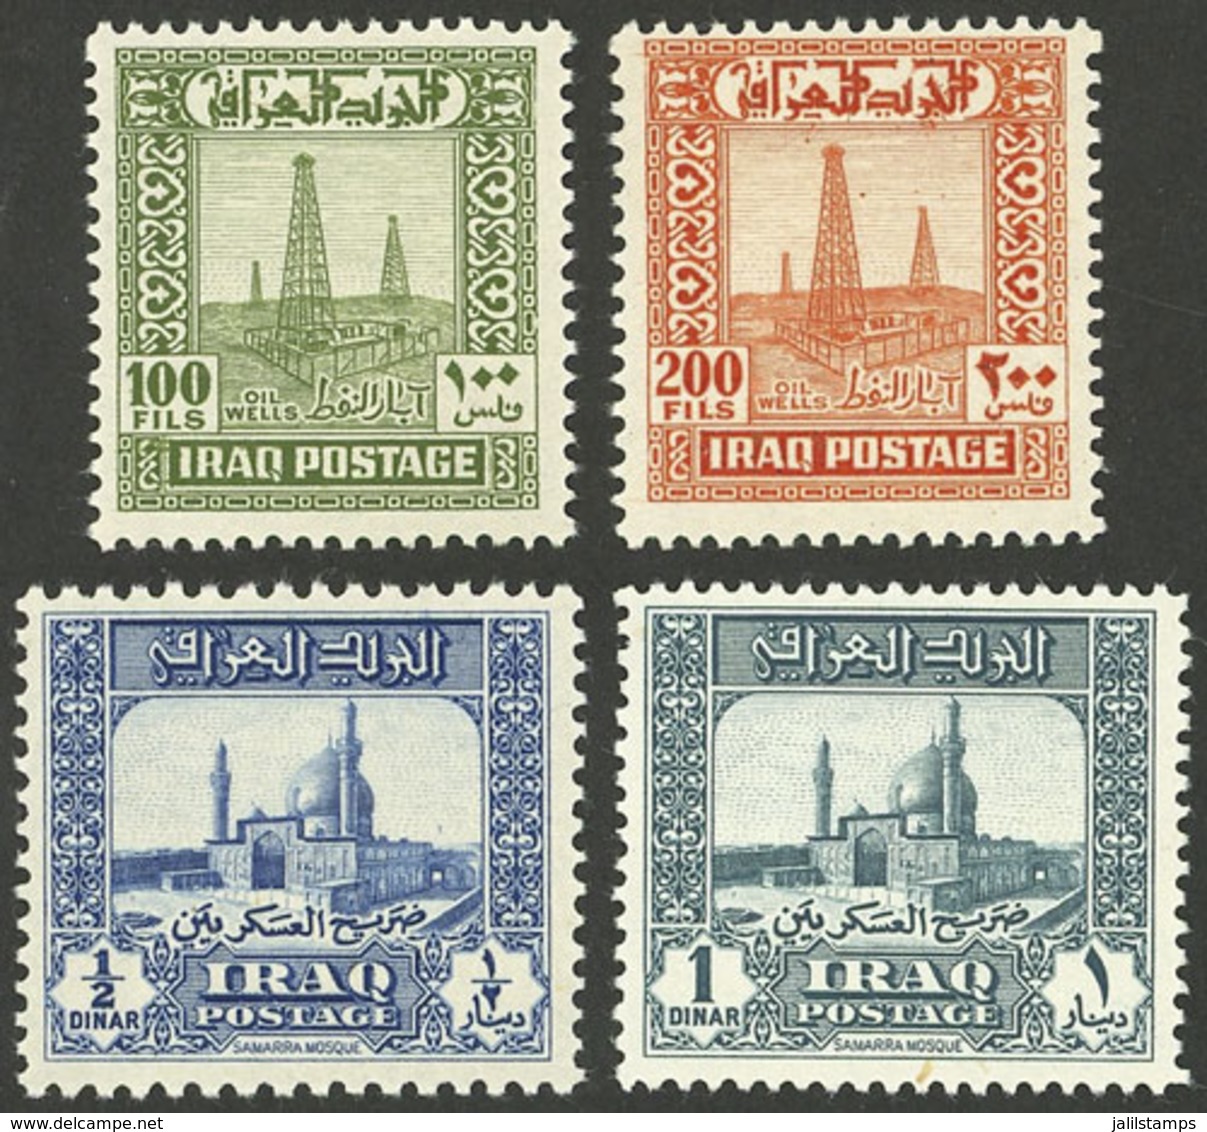 IRAQ: Sc.98/101, 1941/2 The 4 High Values Of The Set, MNH, Excellent Quality! - Iraq